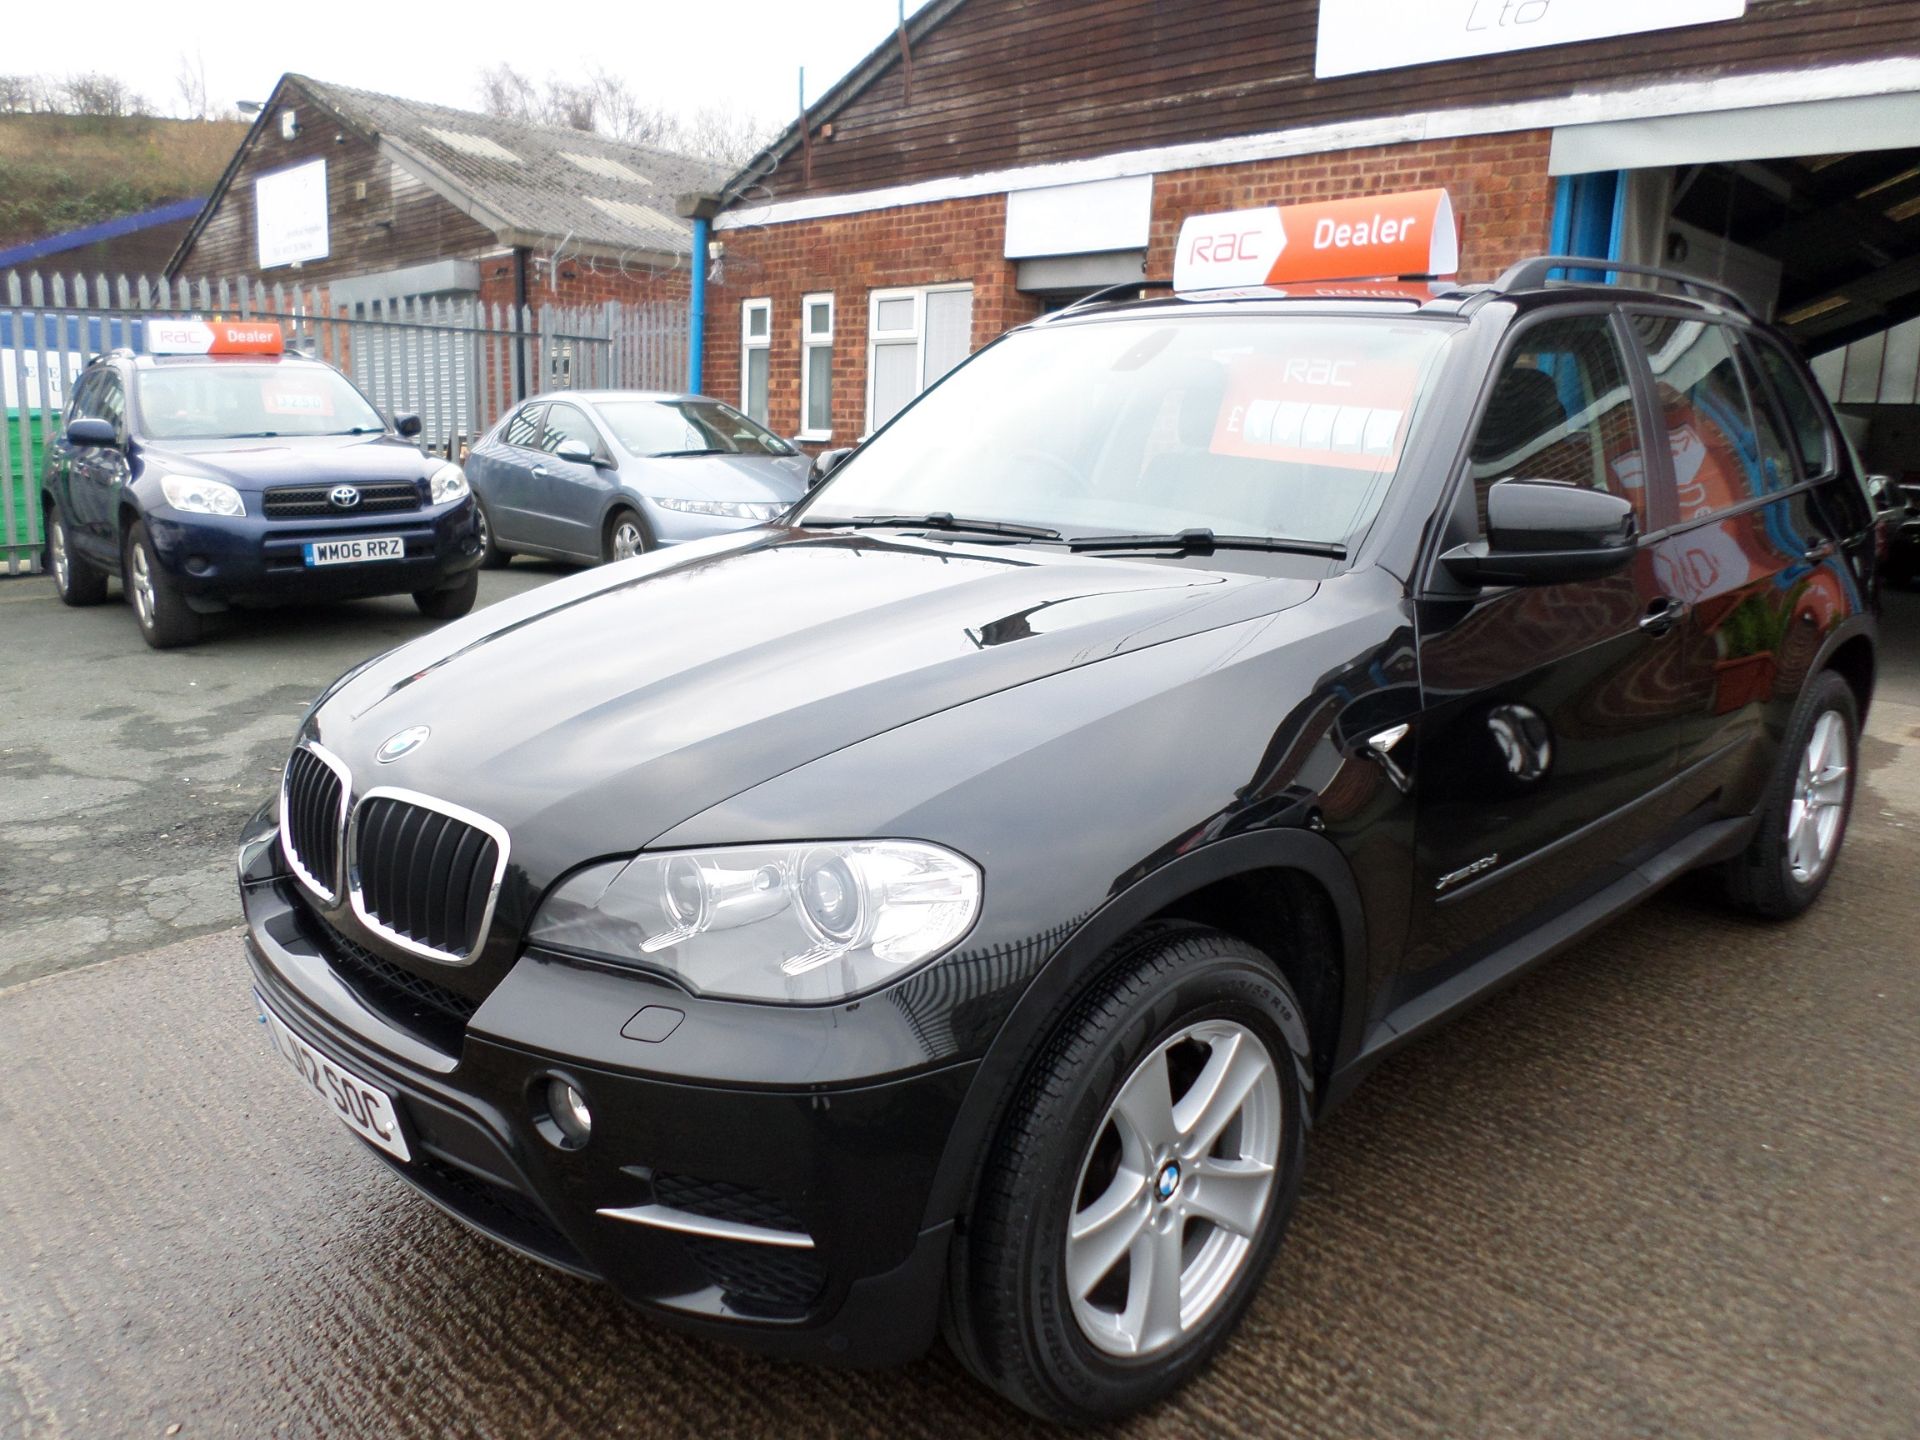 2012/12 REG BMW X5 XDRIVE 30D SE AUTOMATIC - ONLY 22K MILES, SHOWING 1 FORMER KEEPER *NO VAT* - Image 3 of 11